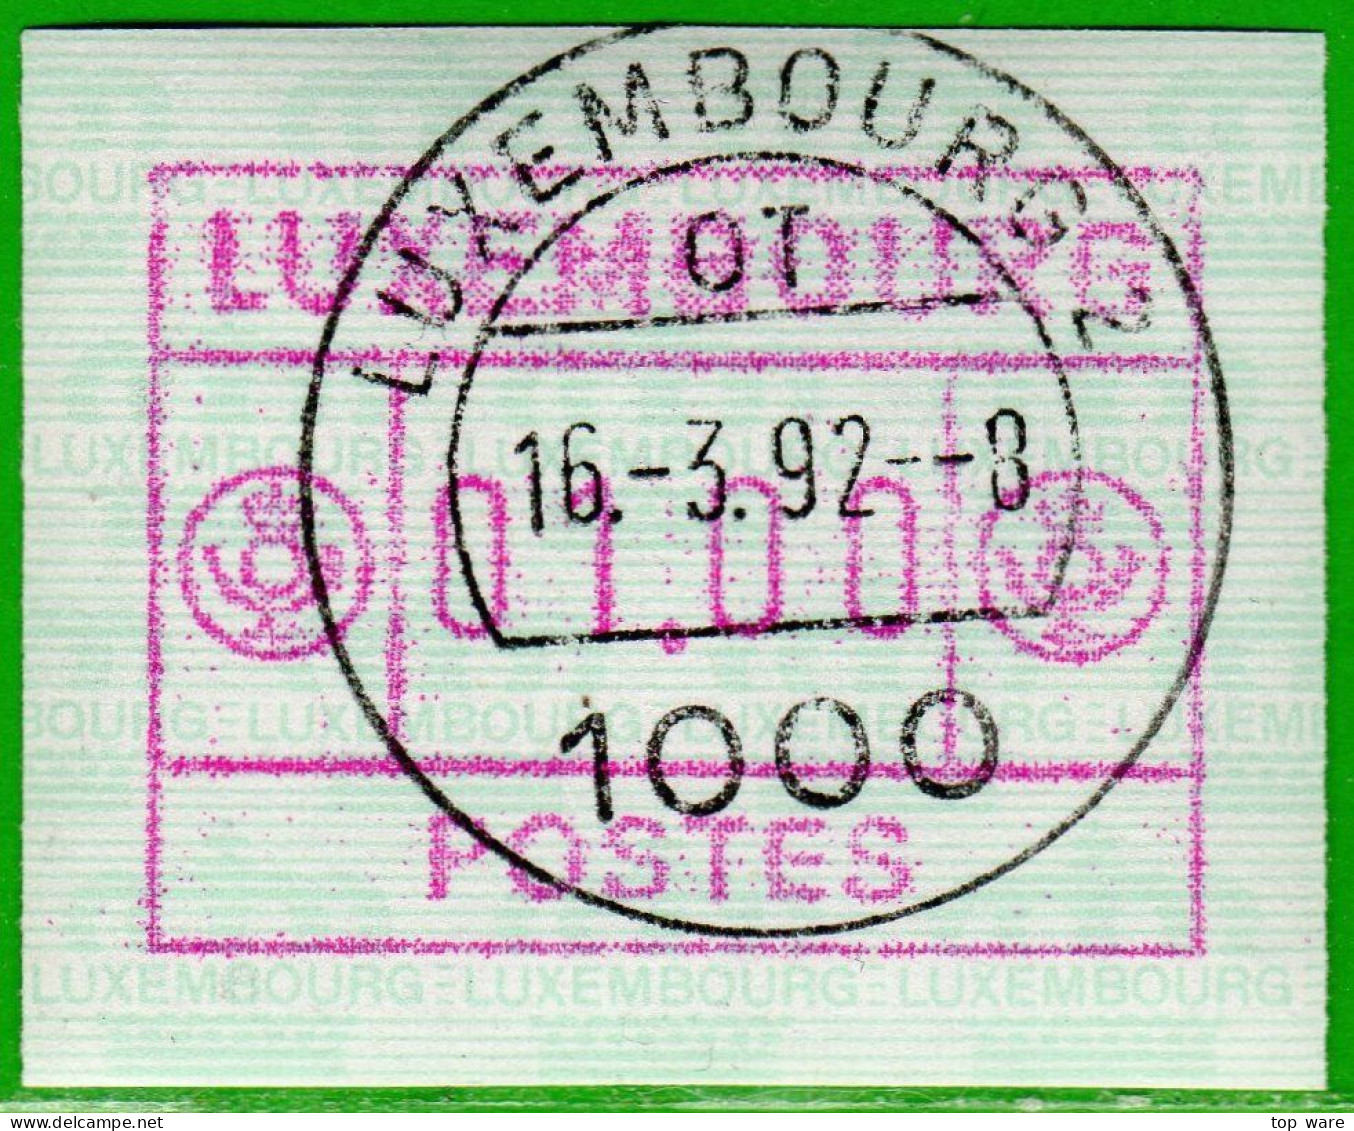 Luxemburg Luxembourg Timbres ATM 2 D Kleines Postes Rotlila / 01.00 Ersttag Tages-O 16.3.1992 / Frama Automatenmarken - Automatenmarken